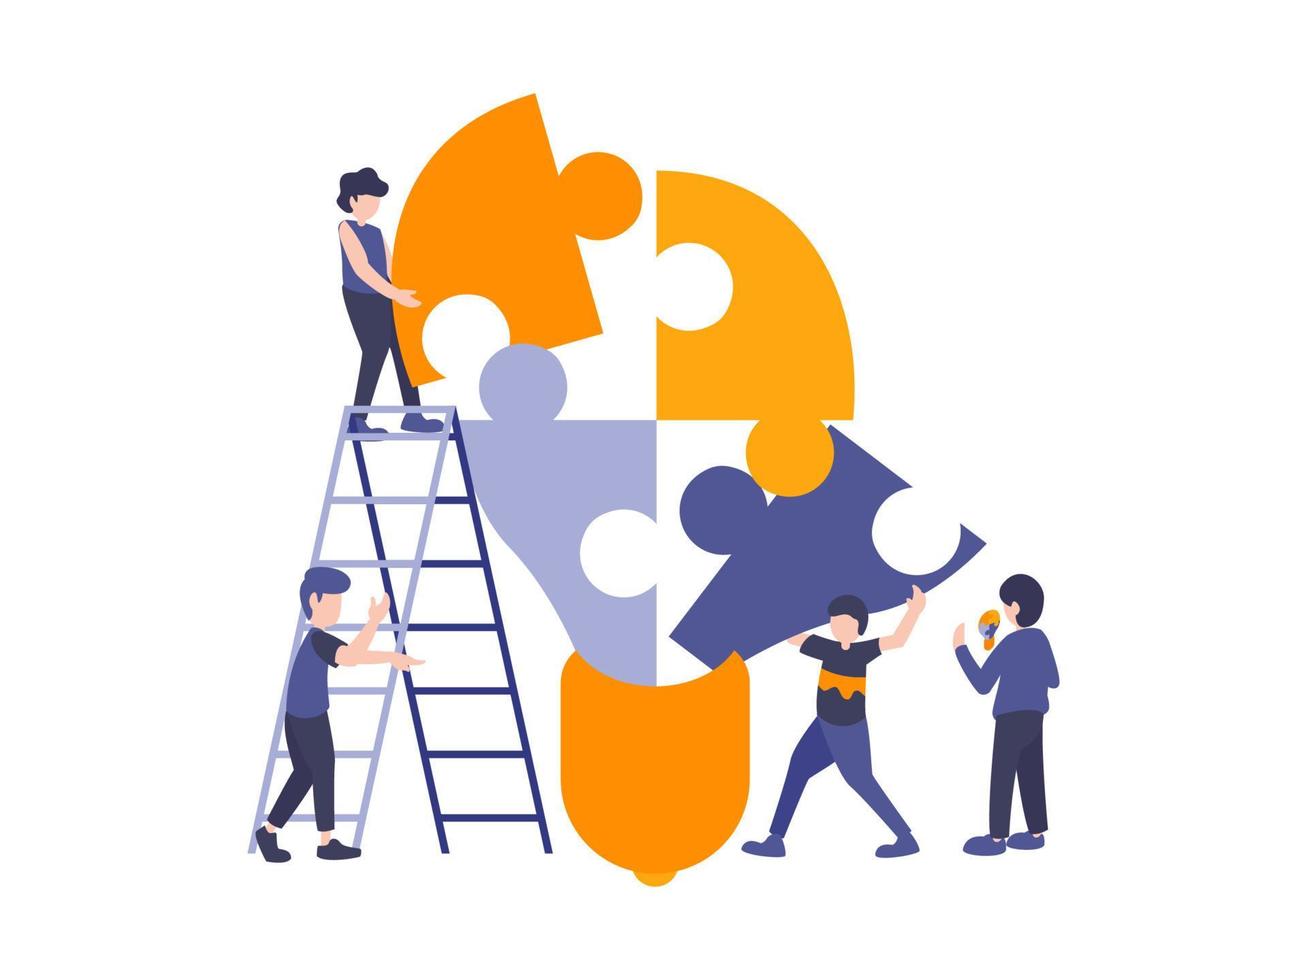 People connecting puzzle elements to build a light bulb. Vector illustration business concept. Team metaphor flat design style.